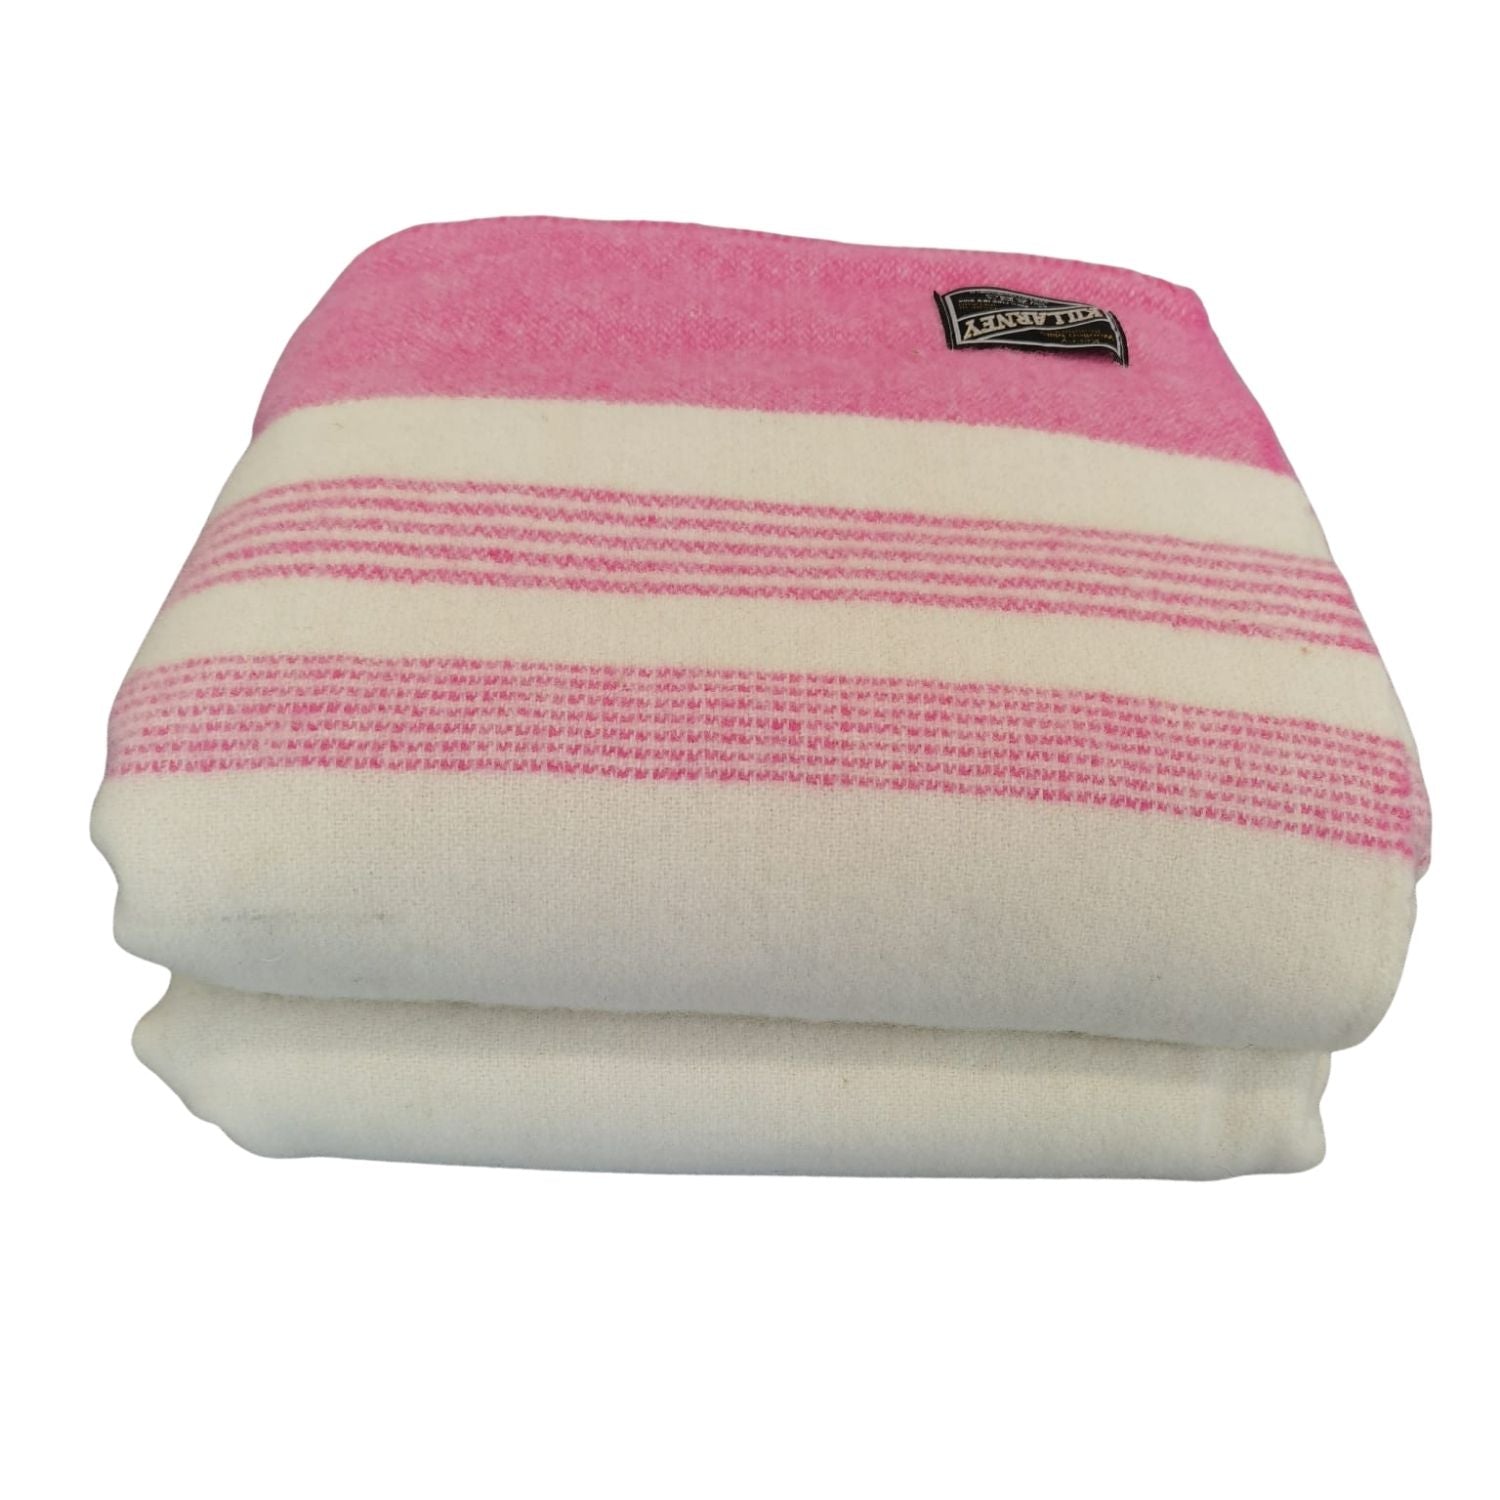 Kerry Woollen Mills 100% Pure Wool Blankets - White &amp; Pink 2 Shaws Department Stores